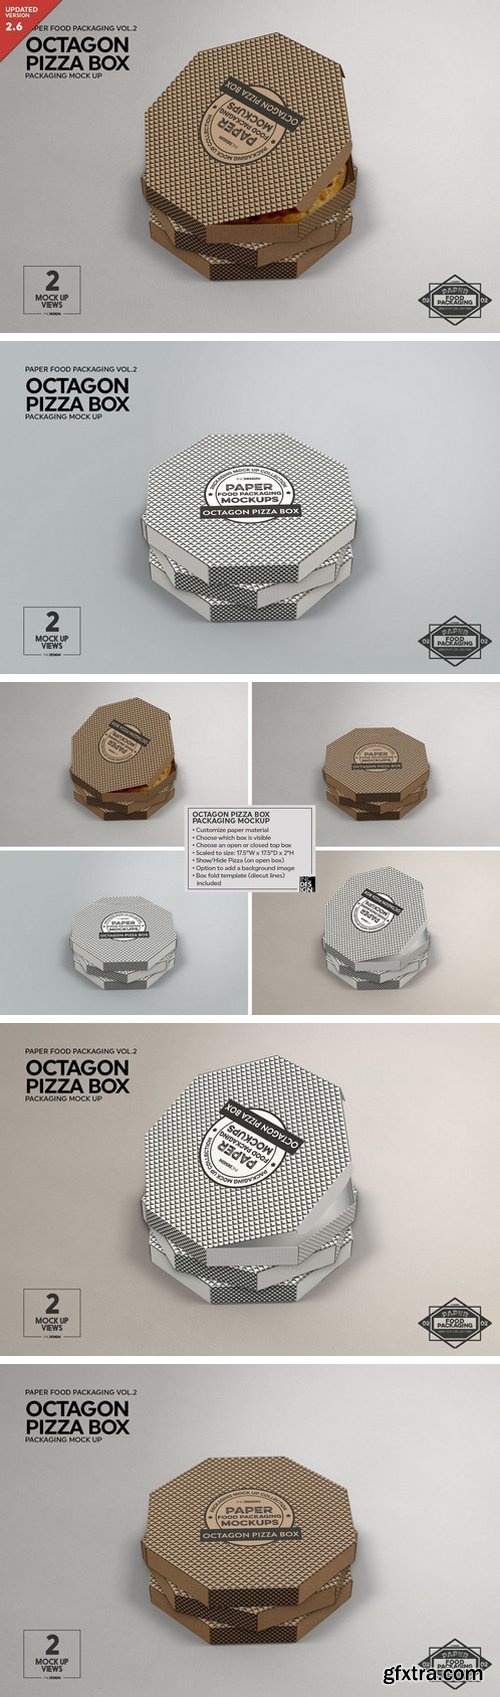 CM - Octagon Pizza Box Packaging Mockup 1018325